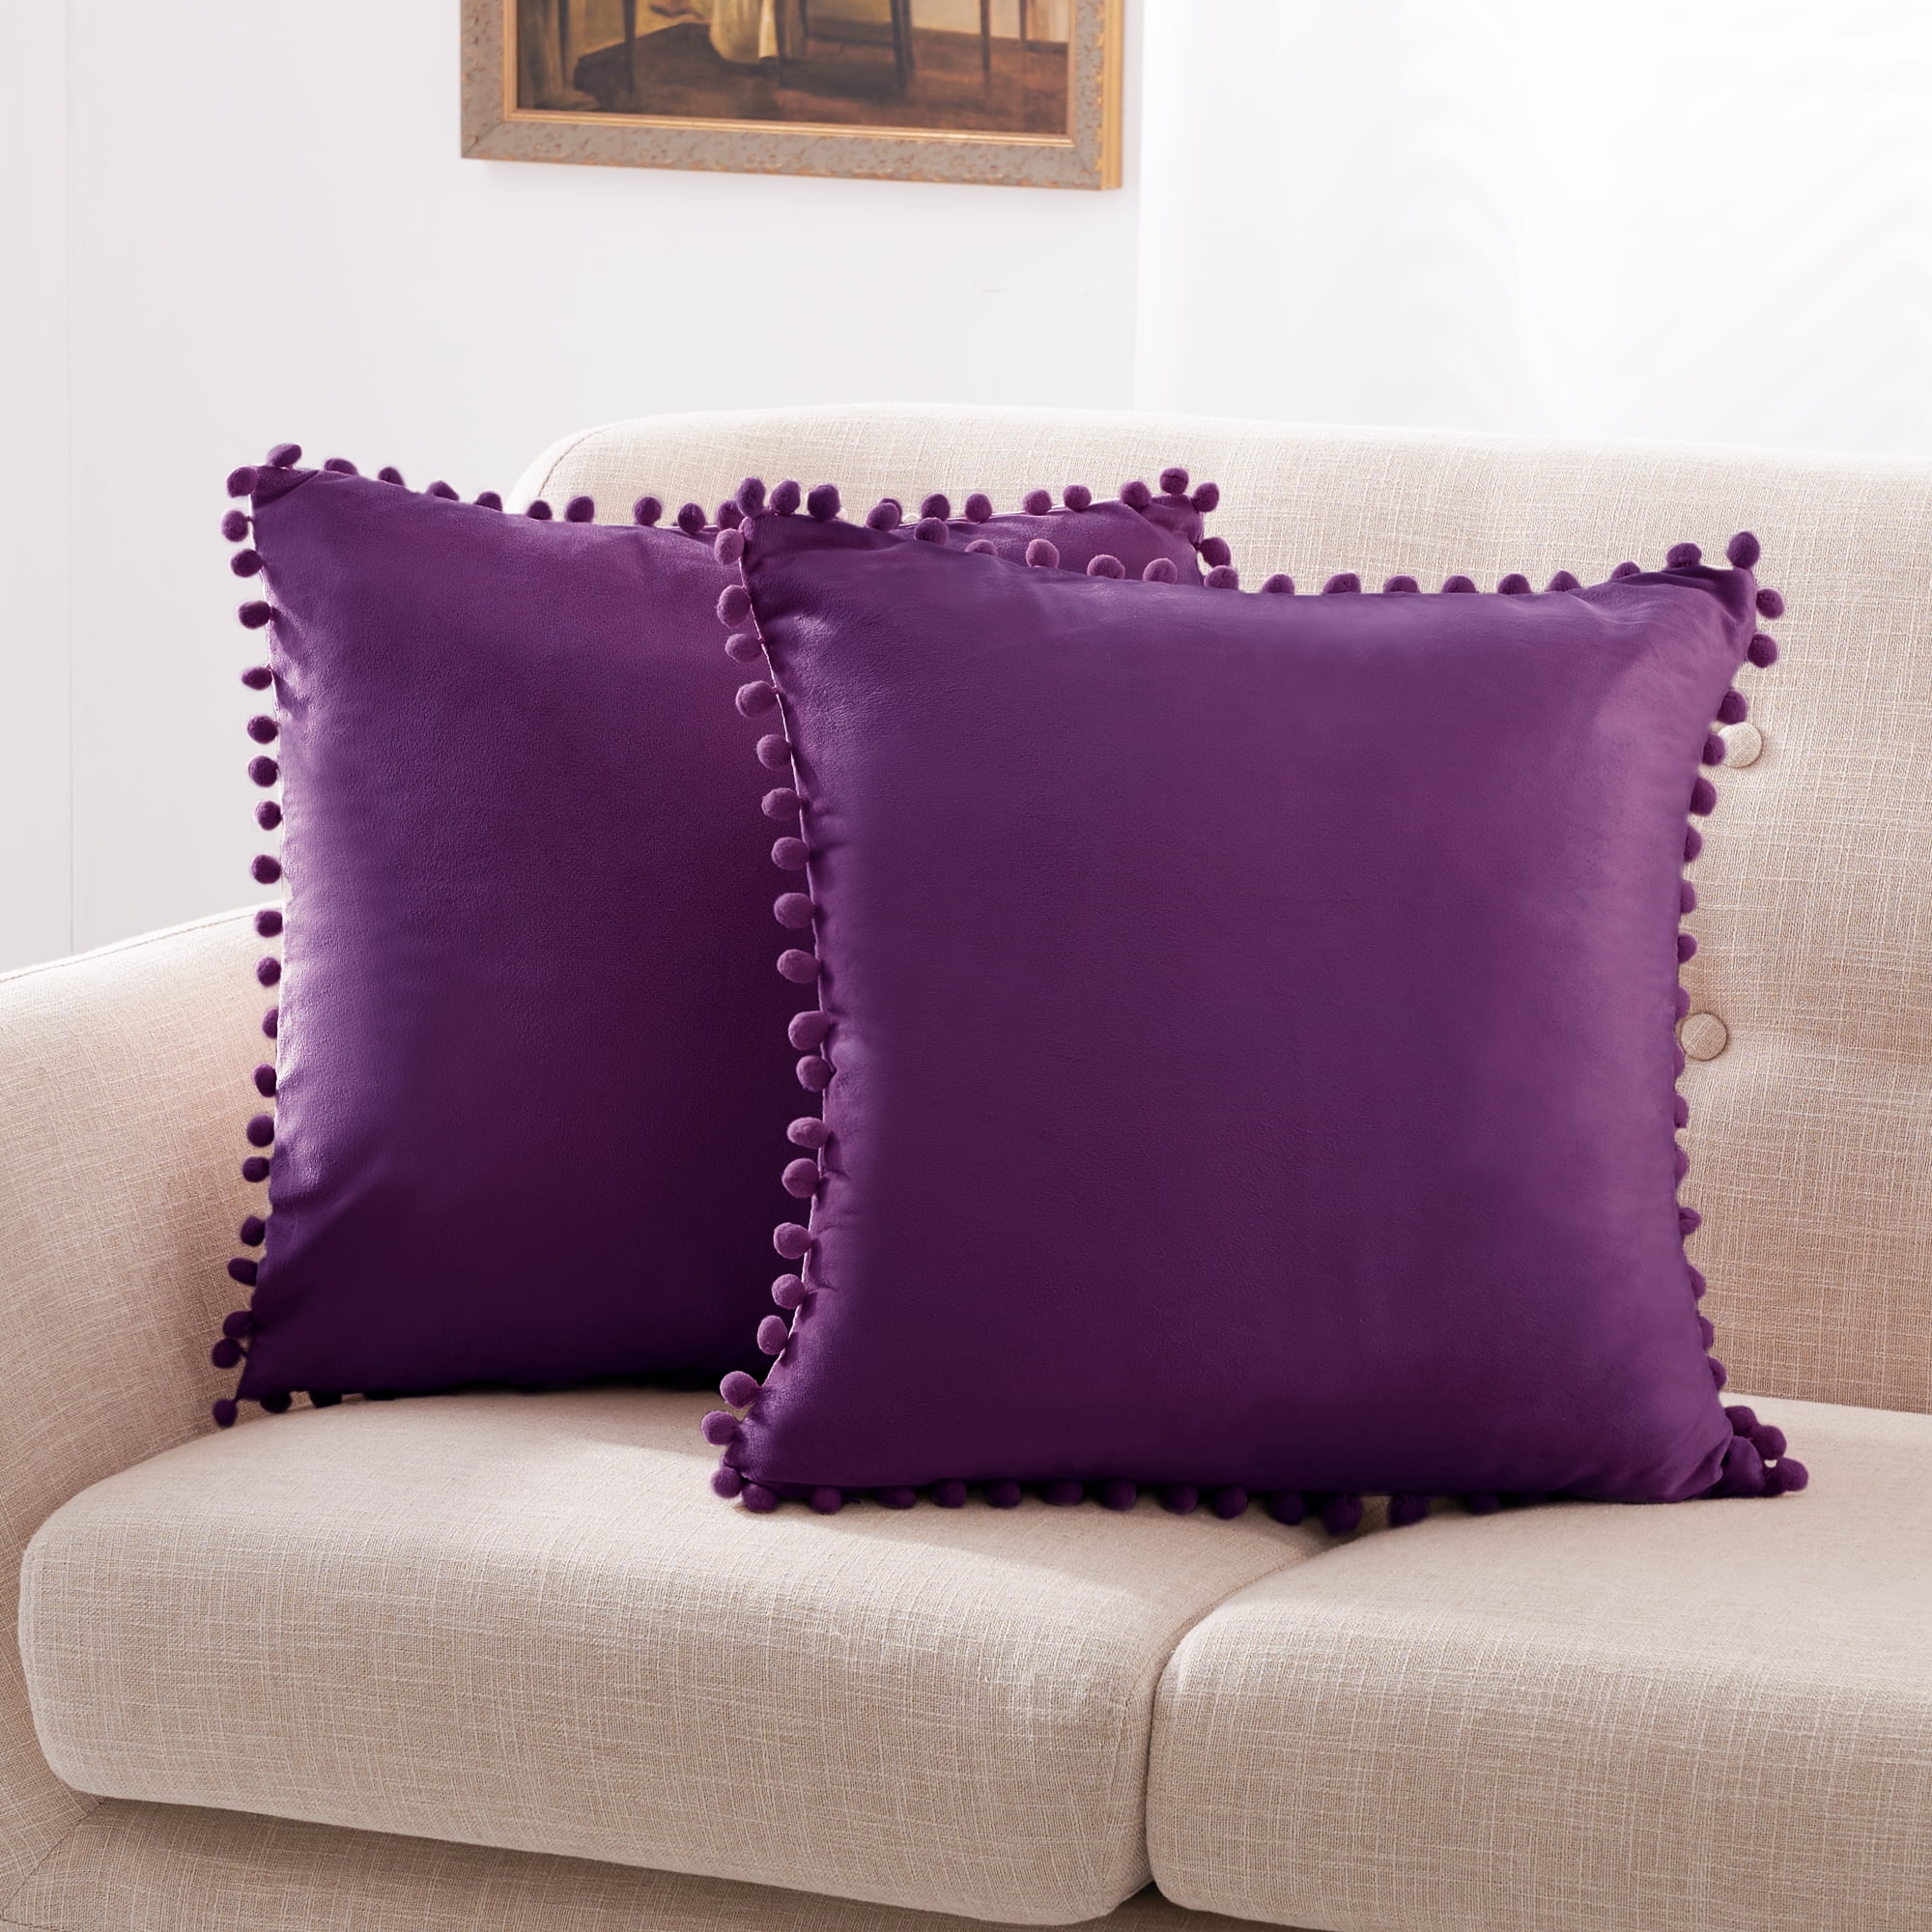 JUSPURBET Decorative Velvet Throw Pillow Covers for Sofa Couch Bed,Pack of 2 Luxury Soft Cushion Cases,16x16 Inches,Eggplant Purple 